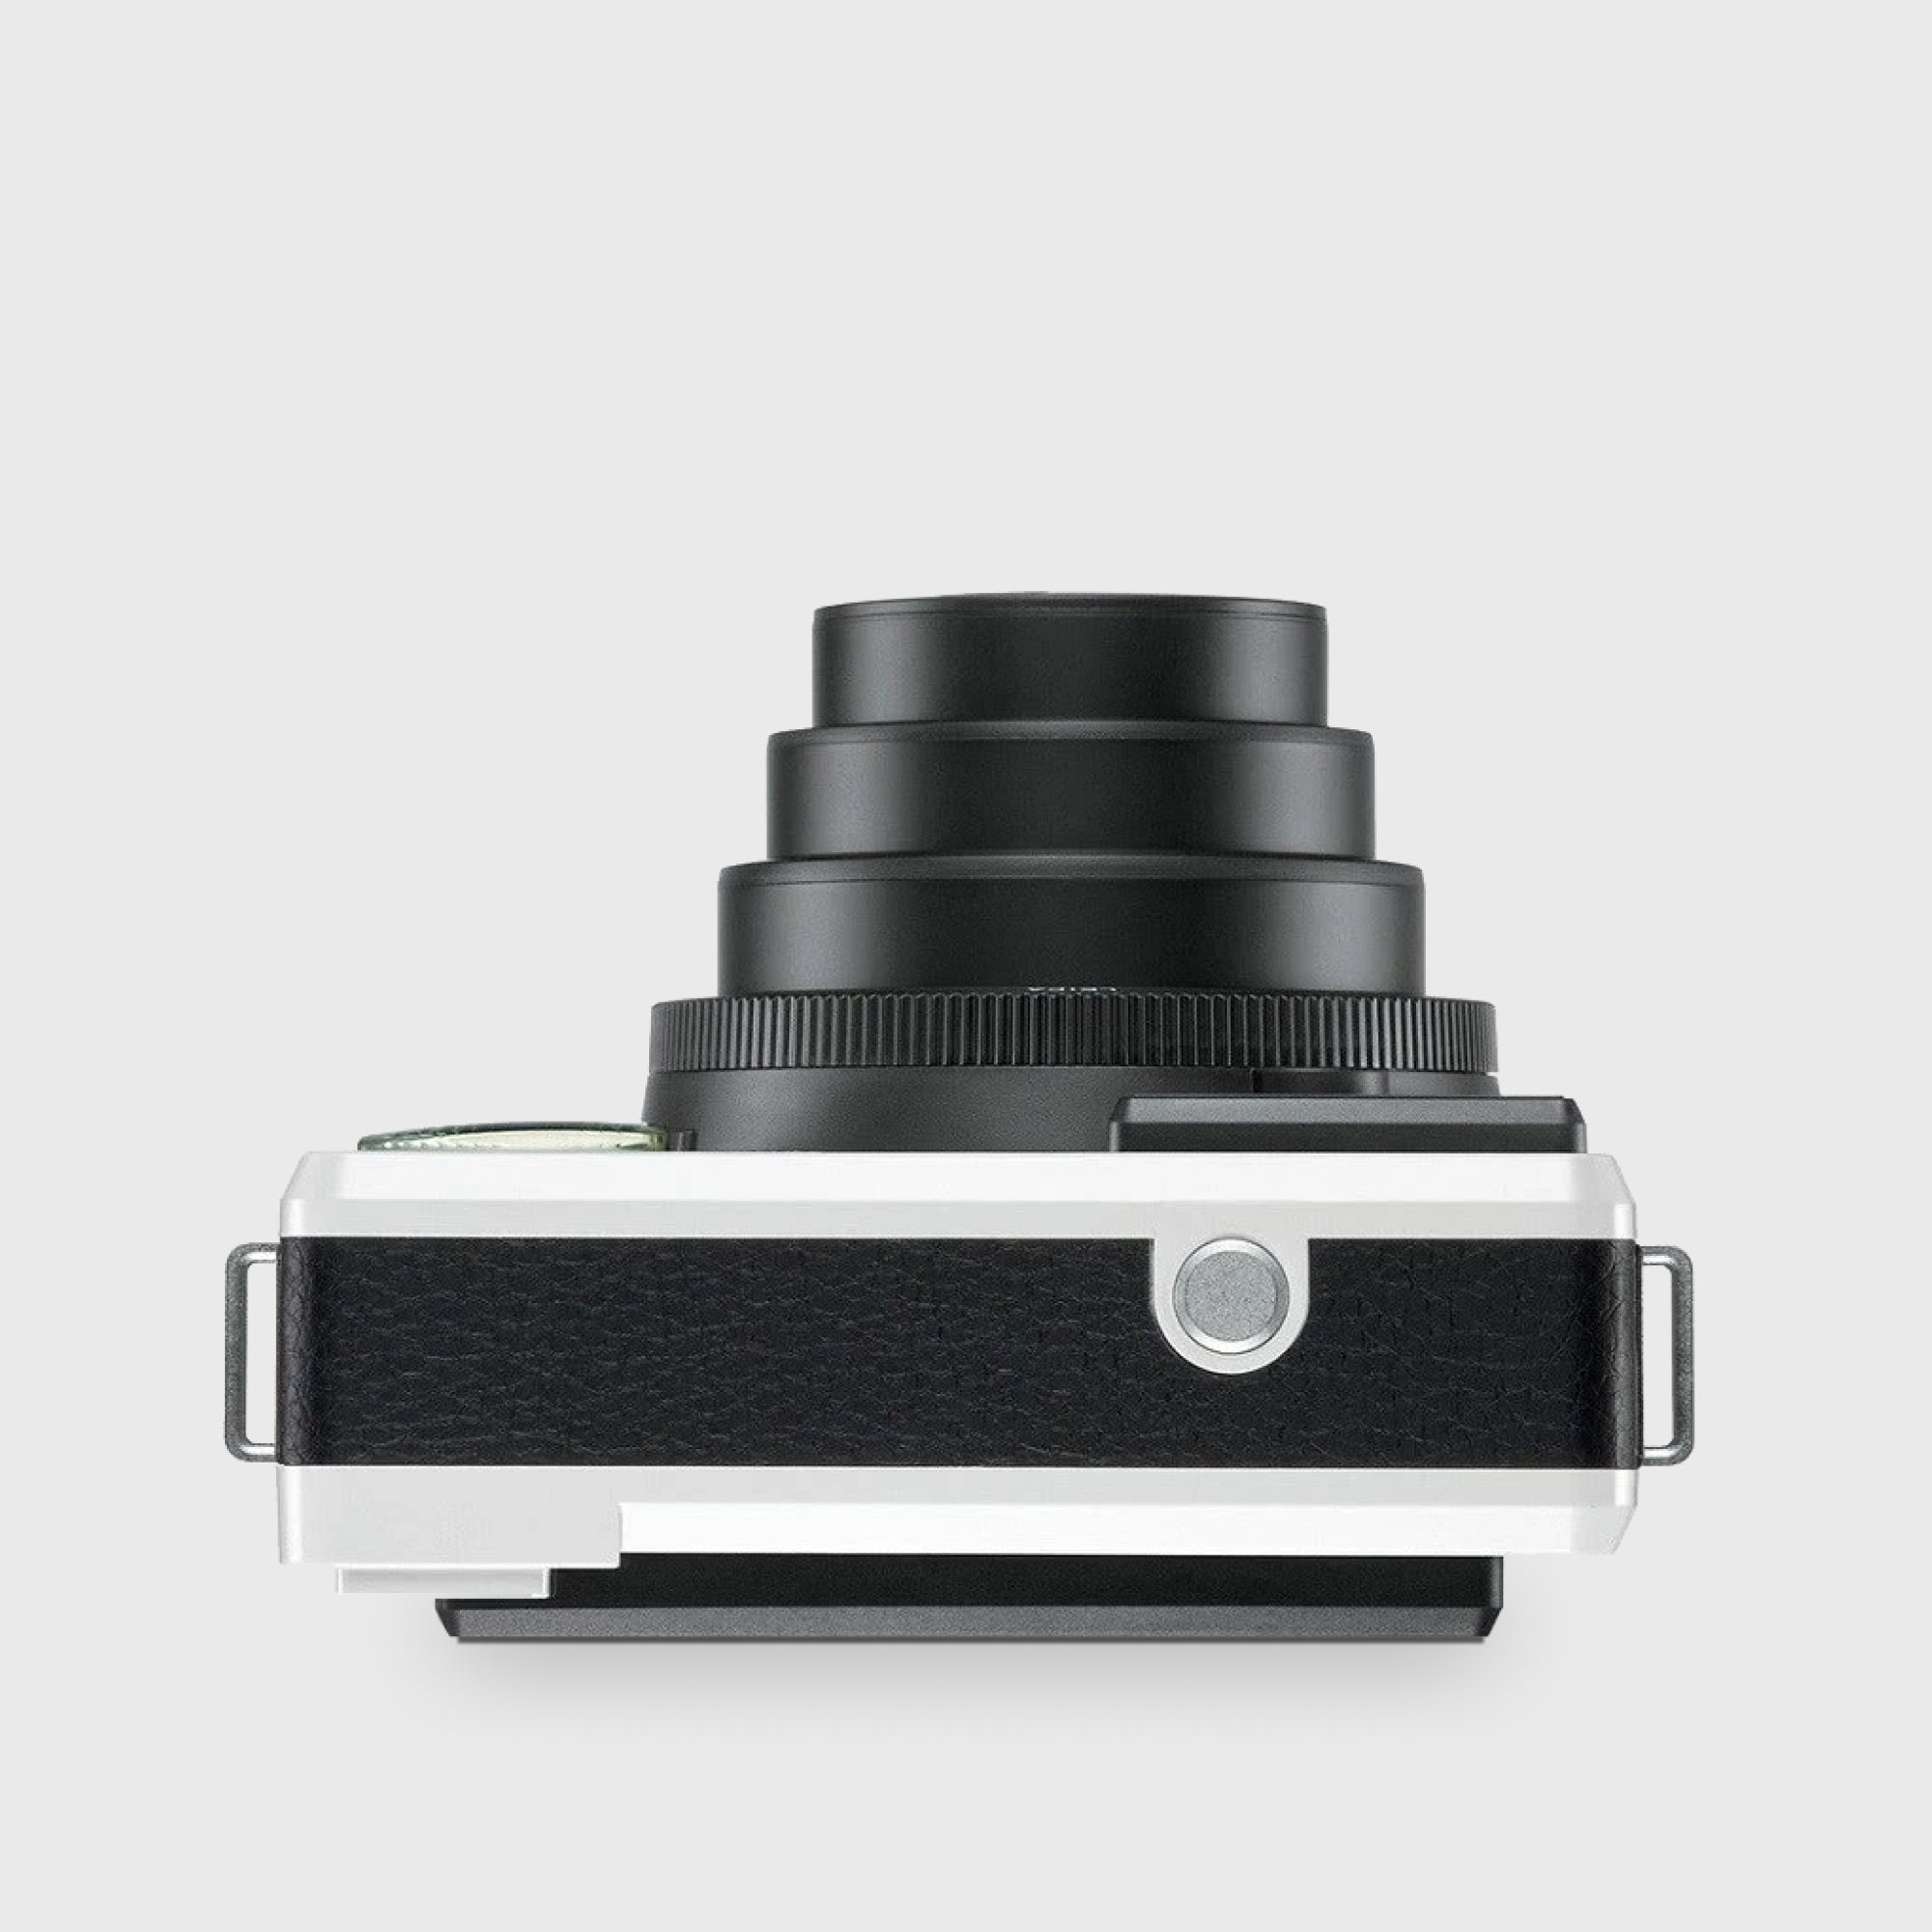 Buy Leica Sofort now at Analogue Amsterdam